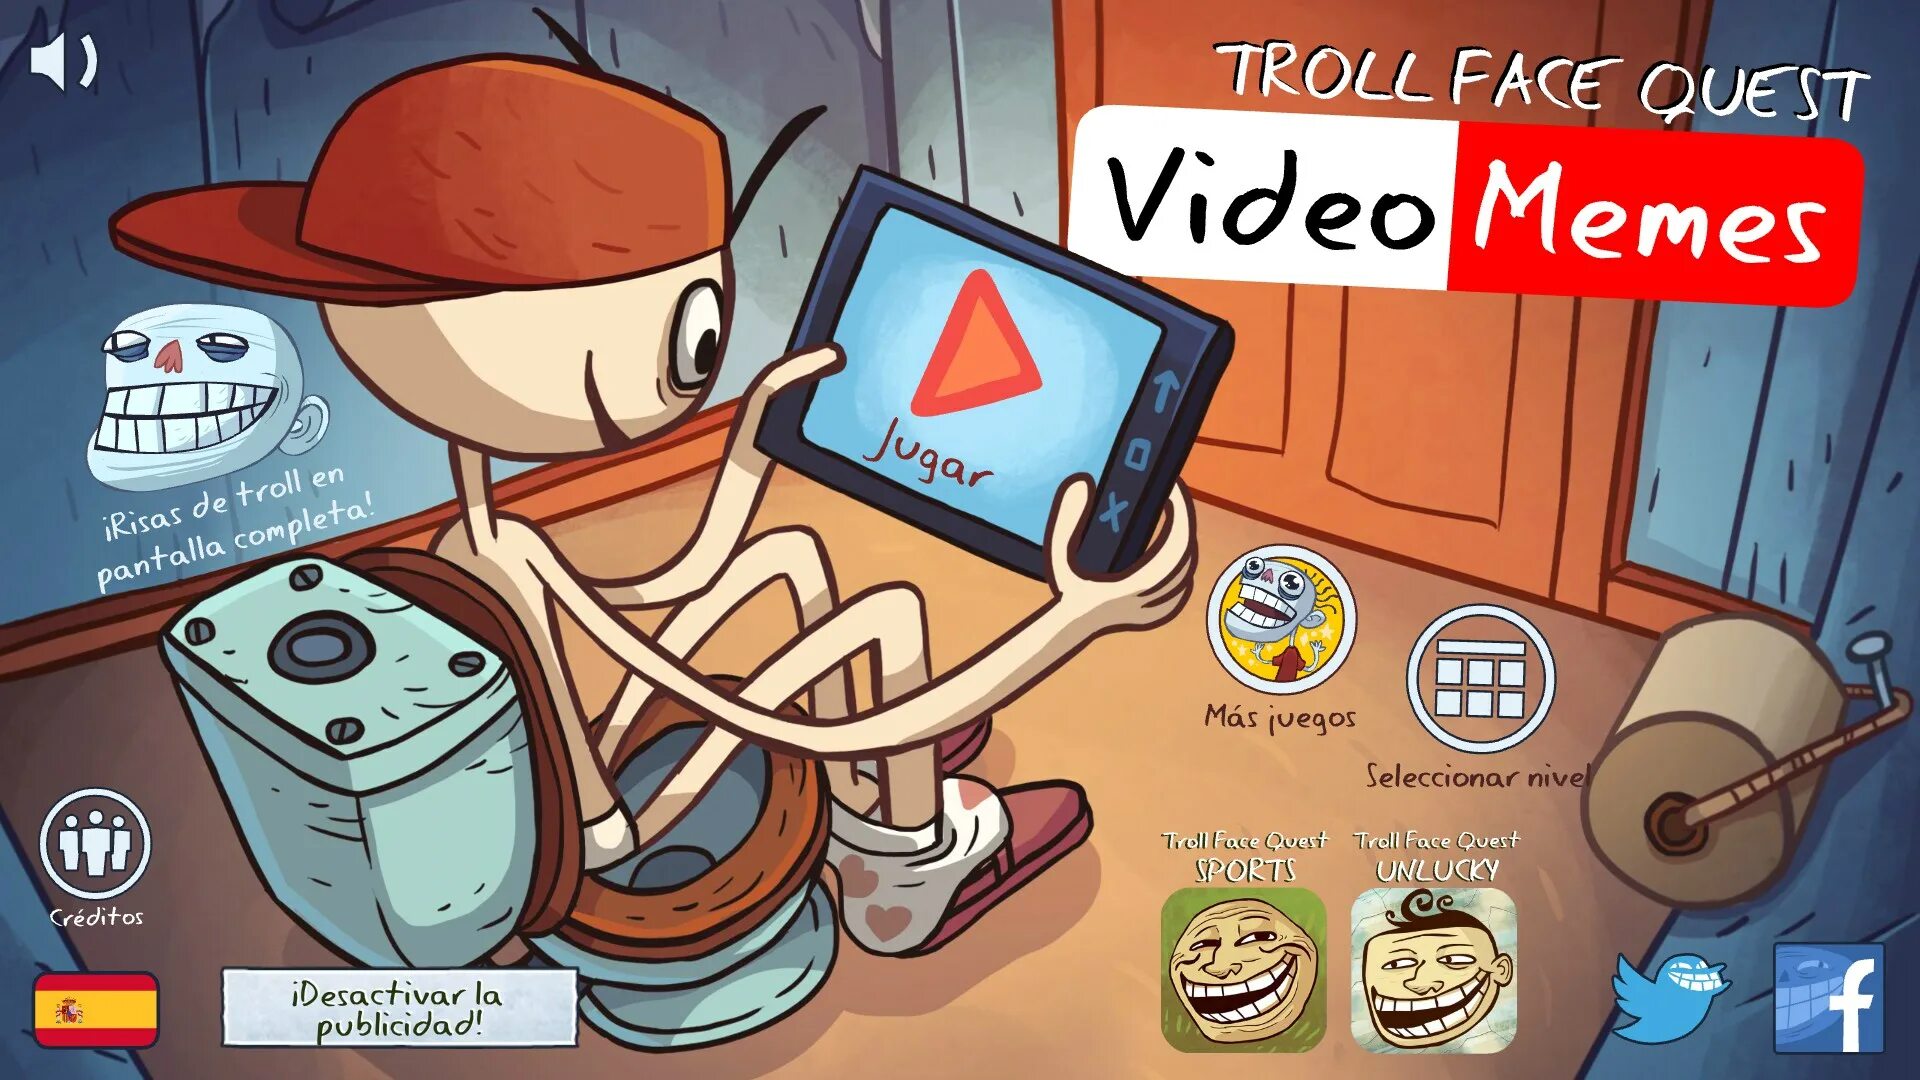 Trollface video memes. Игра Video memes. Тролль квест. Троллфейс квест. Troll face Quest Video games.